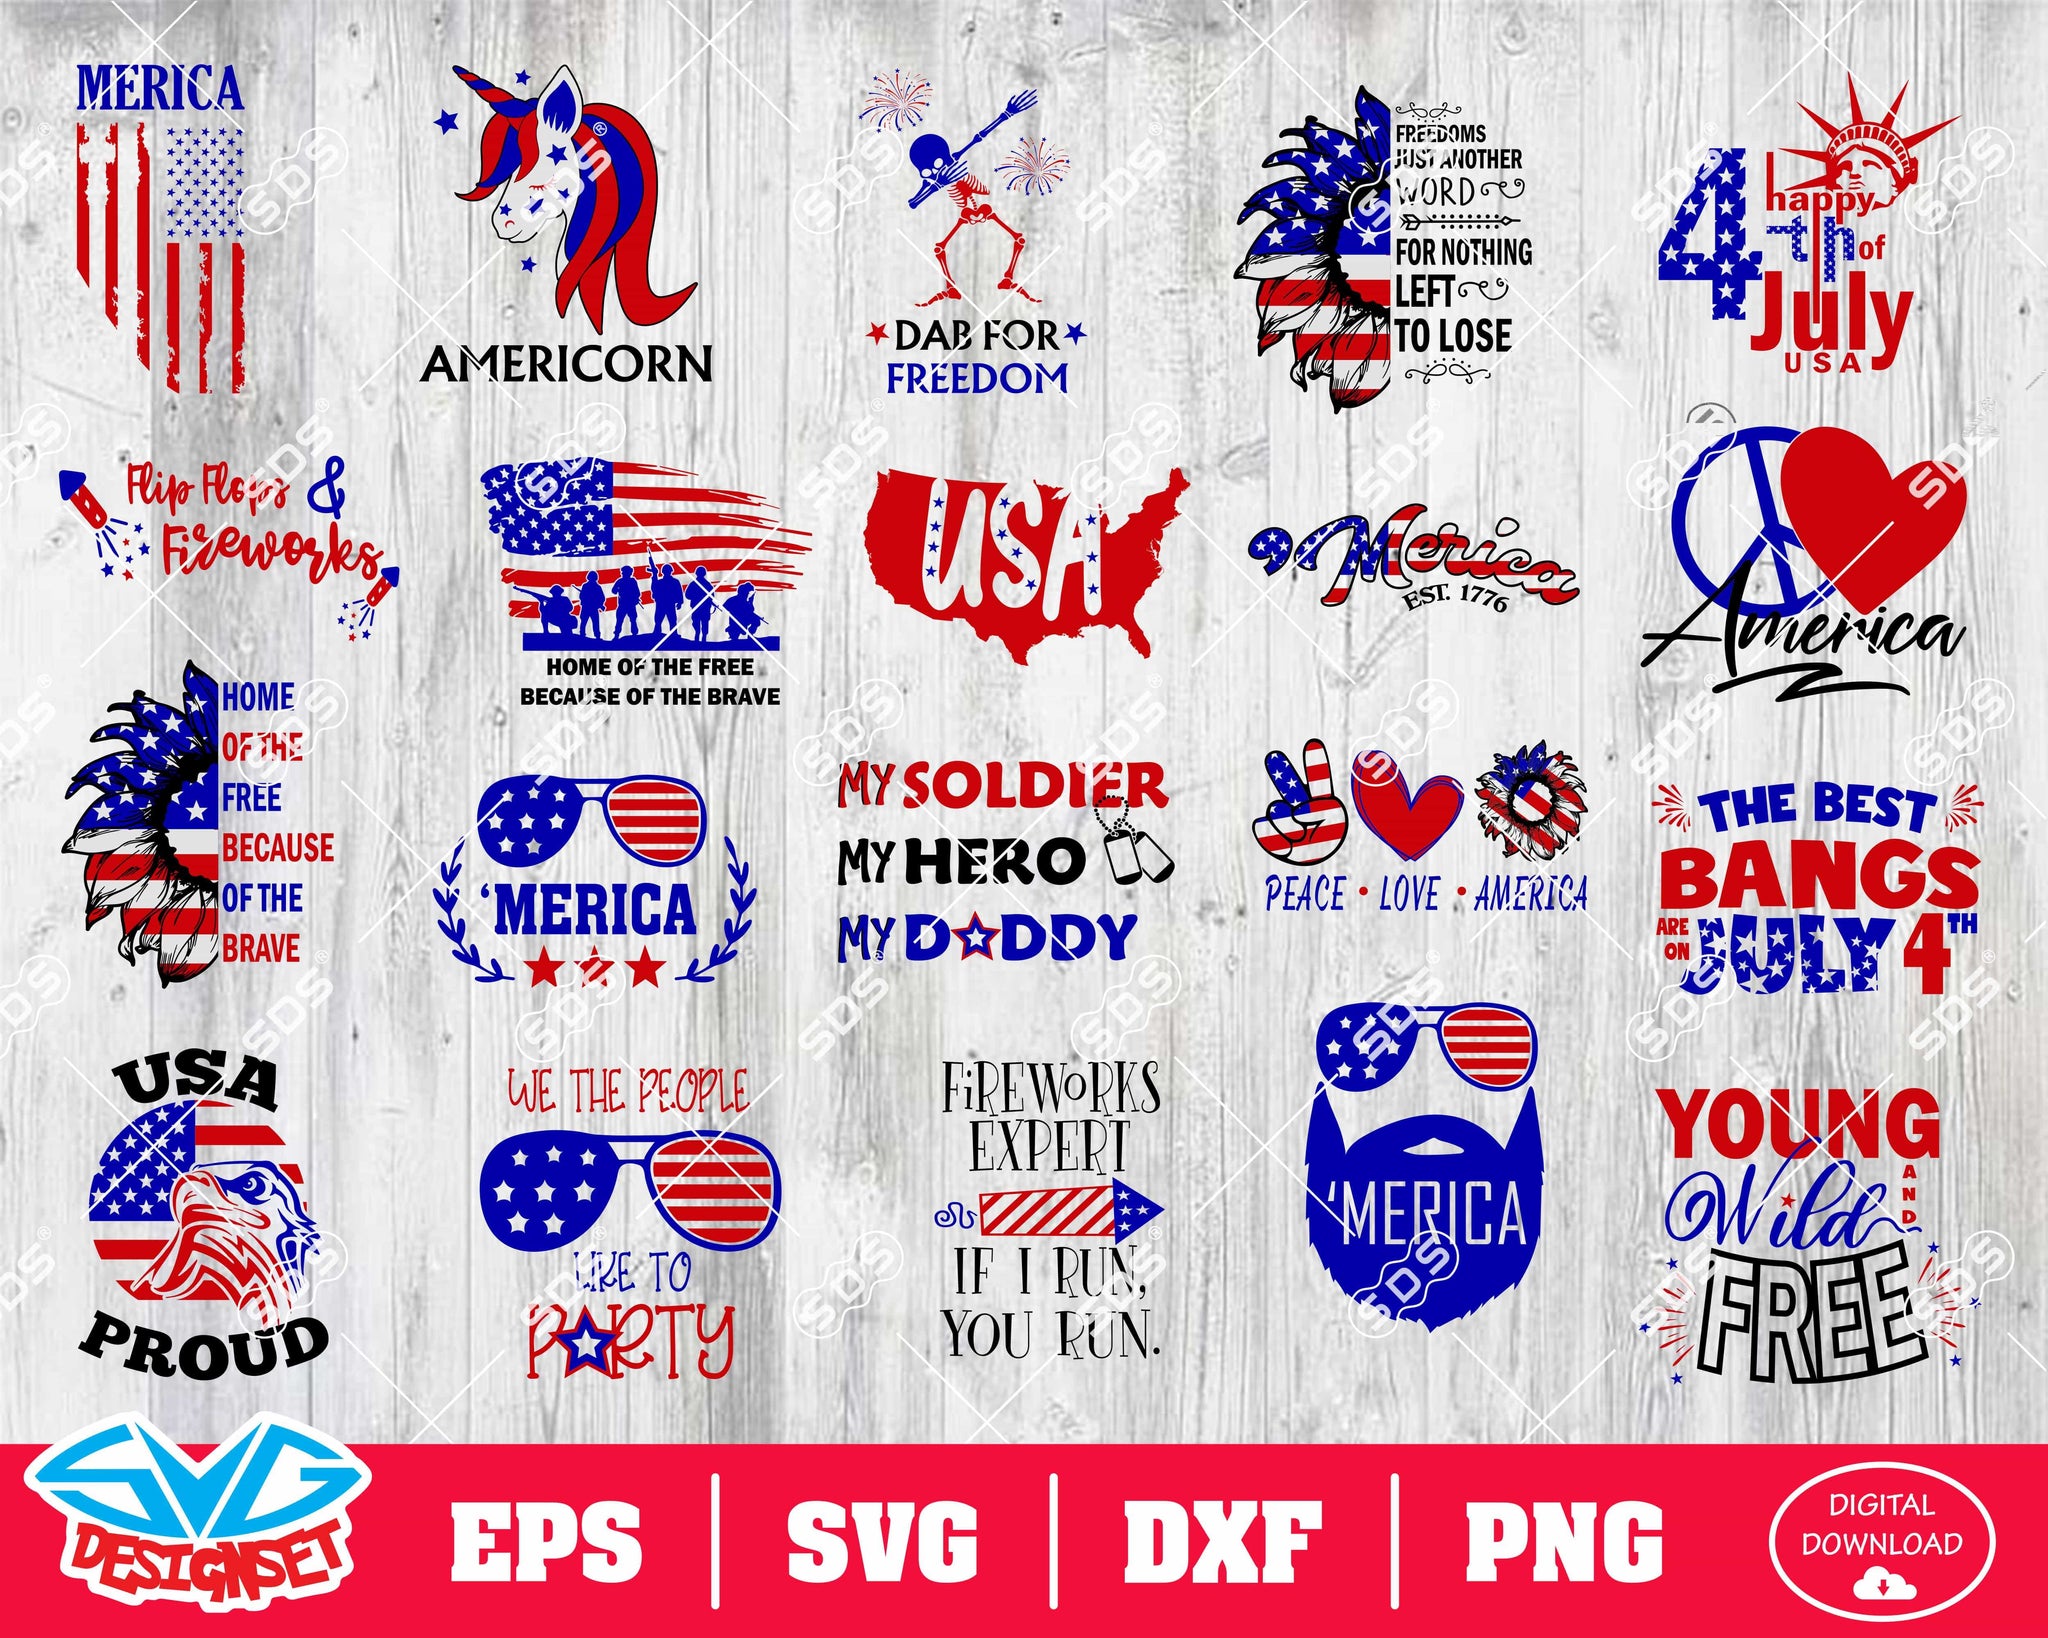 Fourth of July Svg, Dxf, Eps, Png, Clipart, Silhouette and Cutfiles #6 - SVGDesignSets